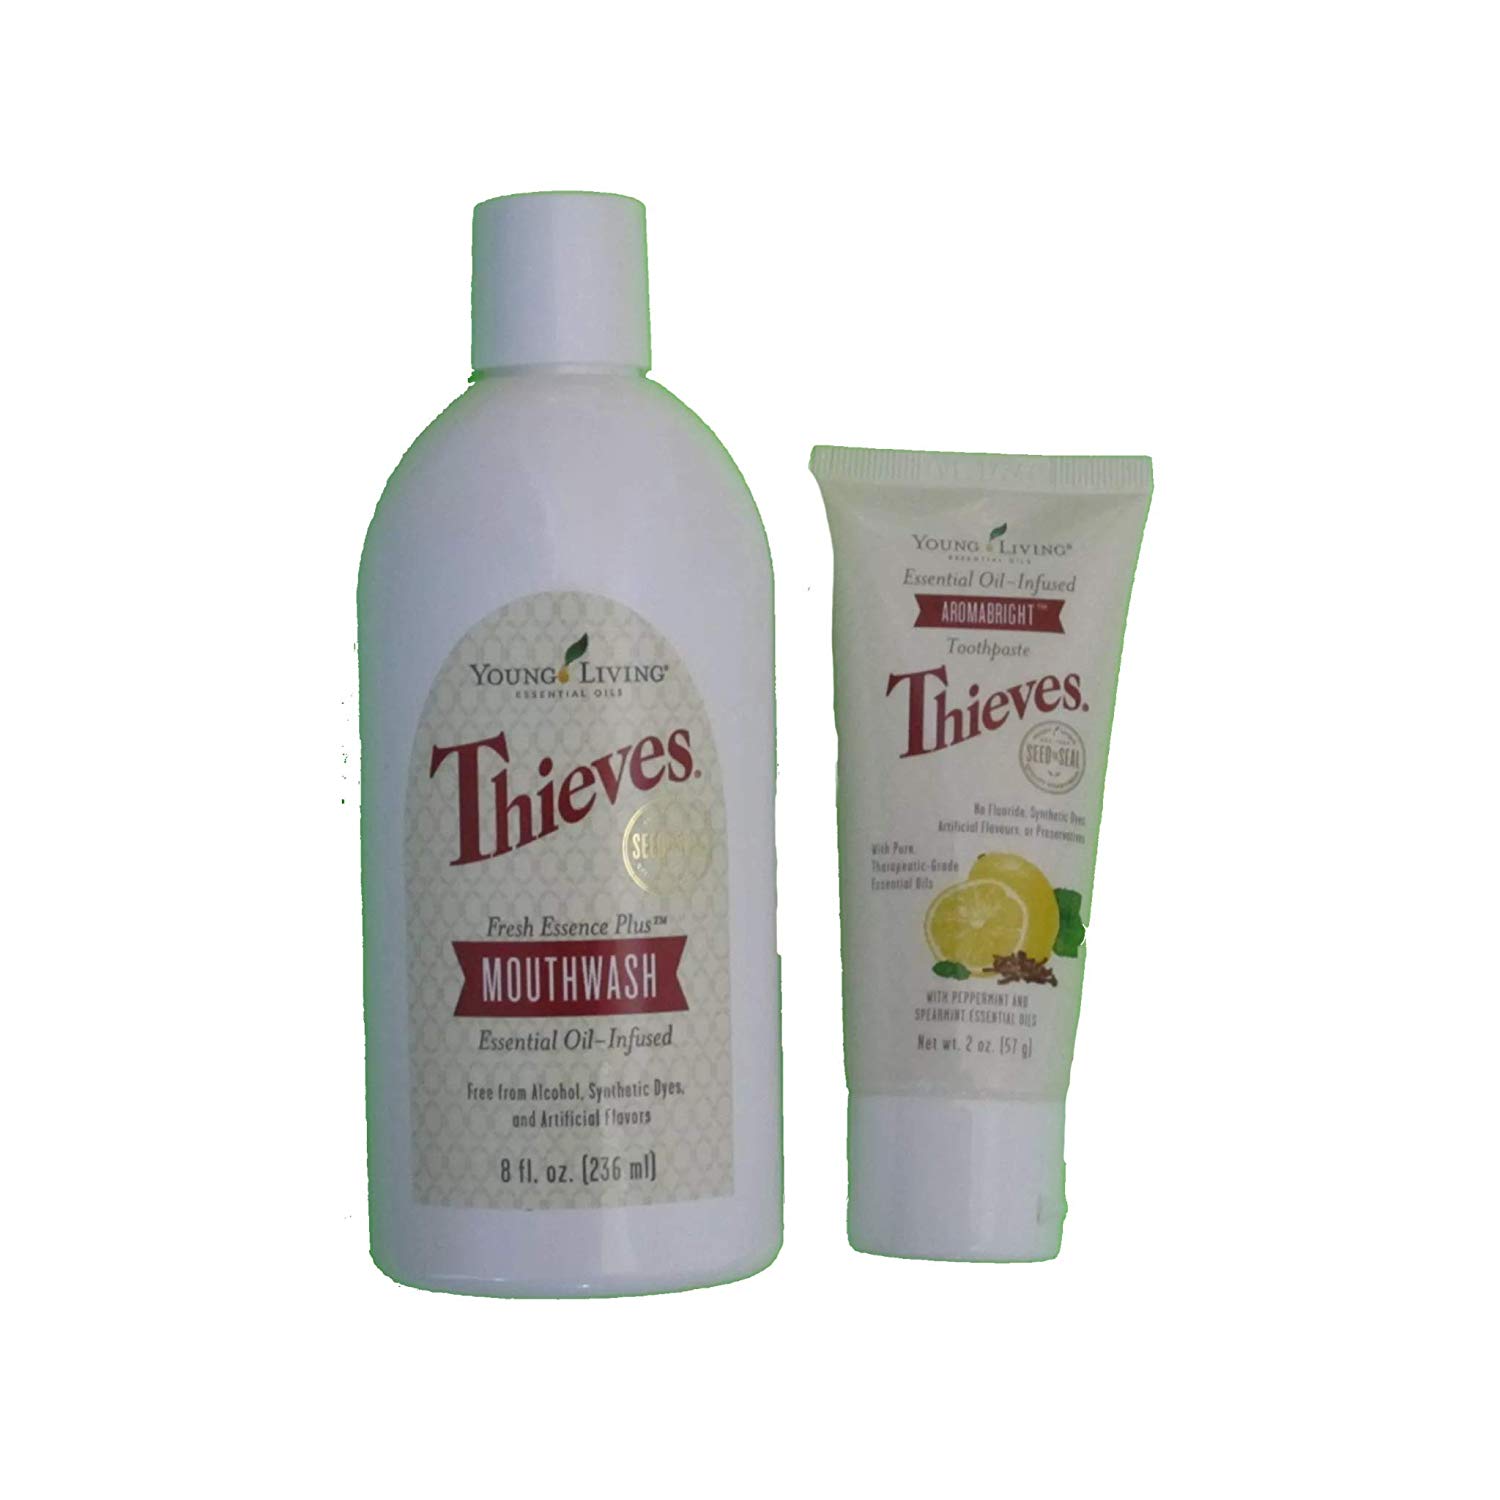 Thieves Oral Care with The Pretty Oil